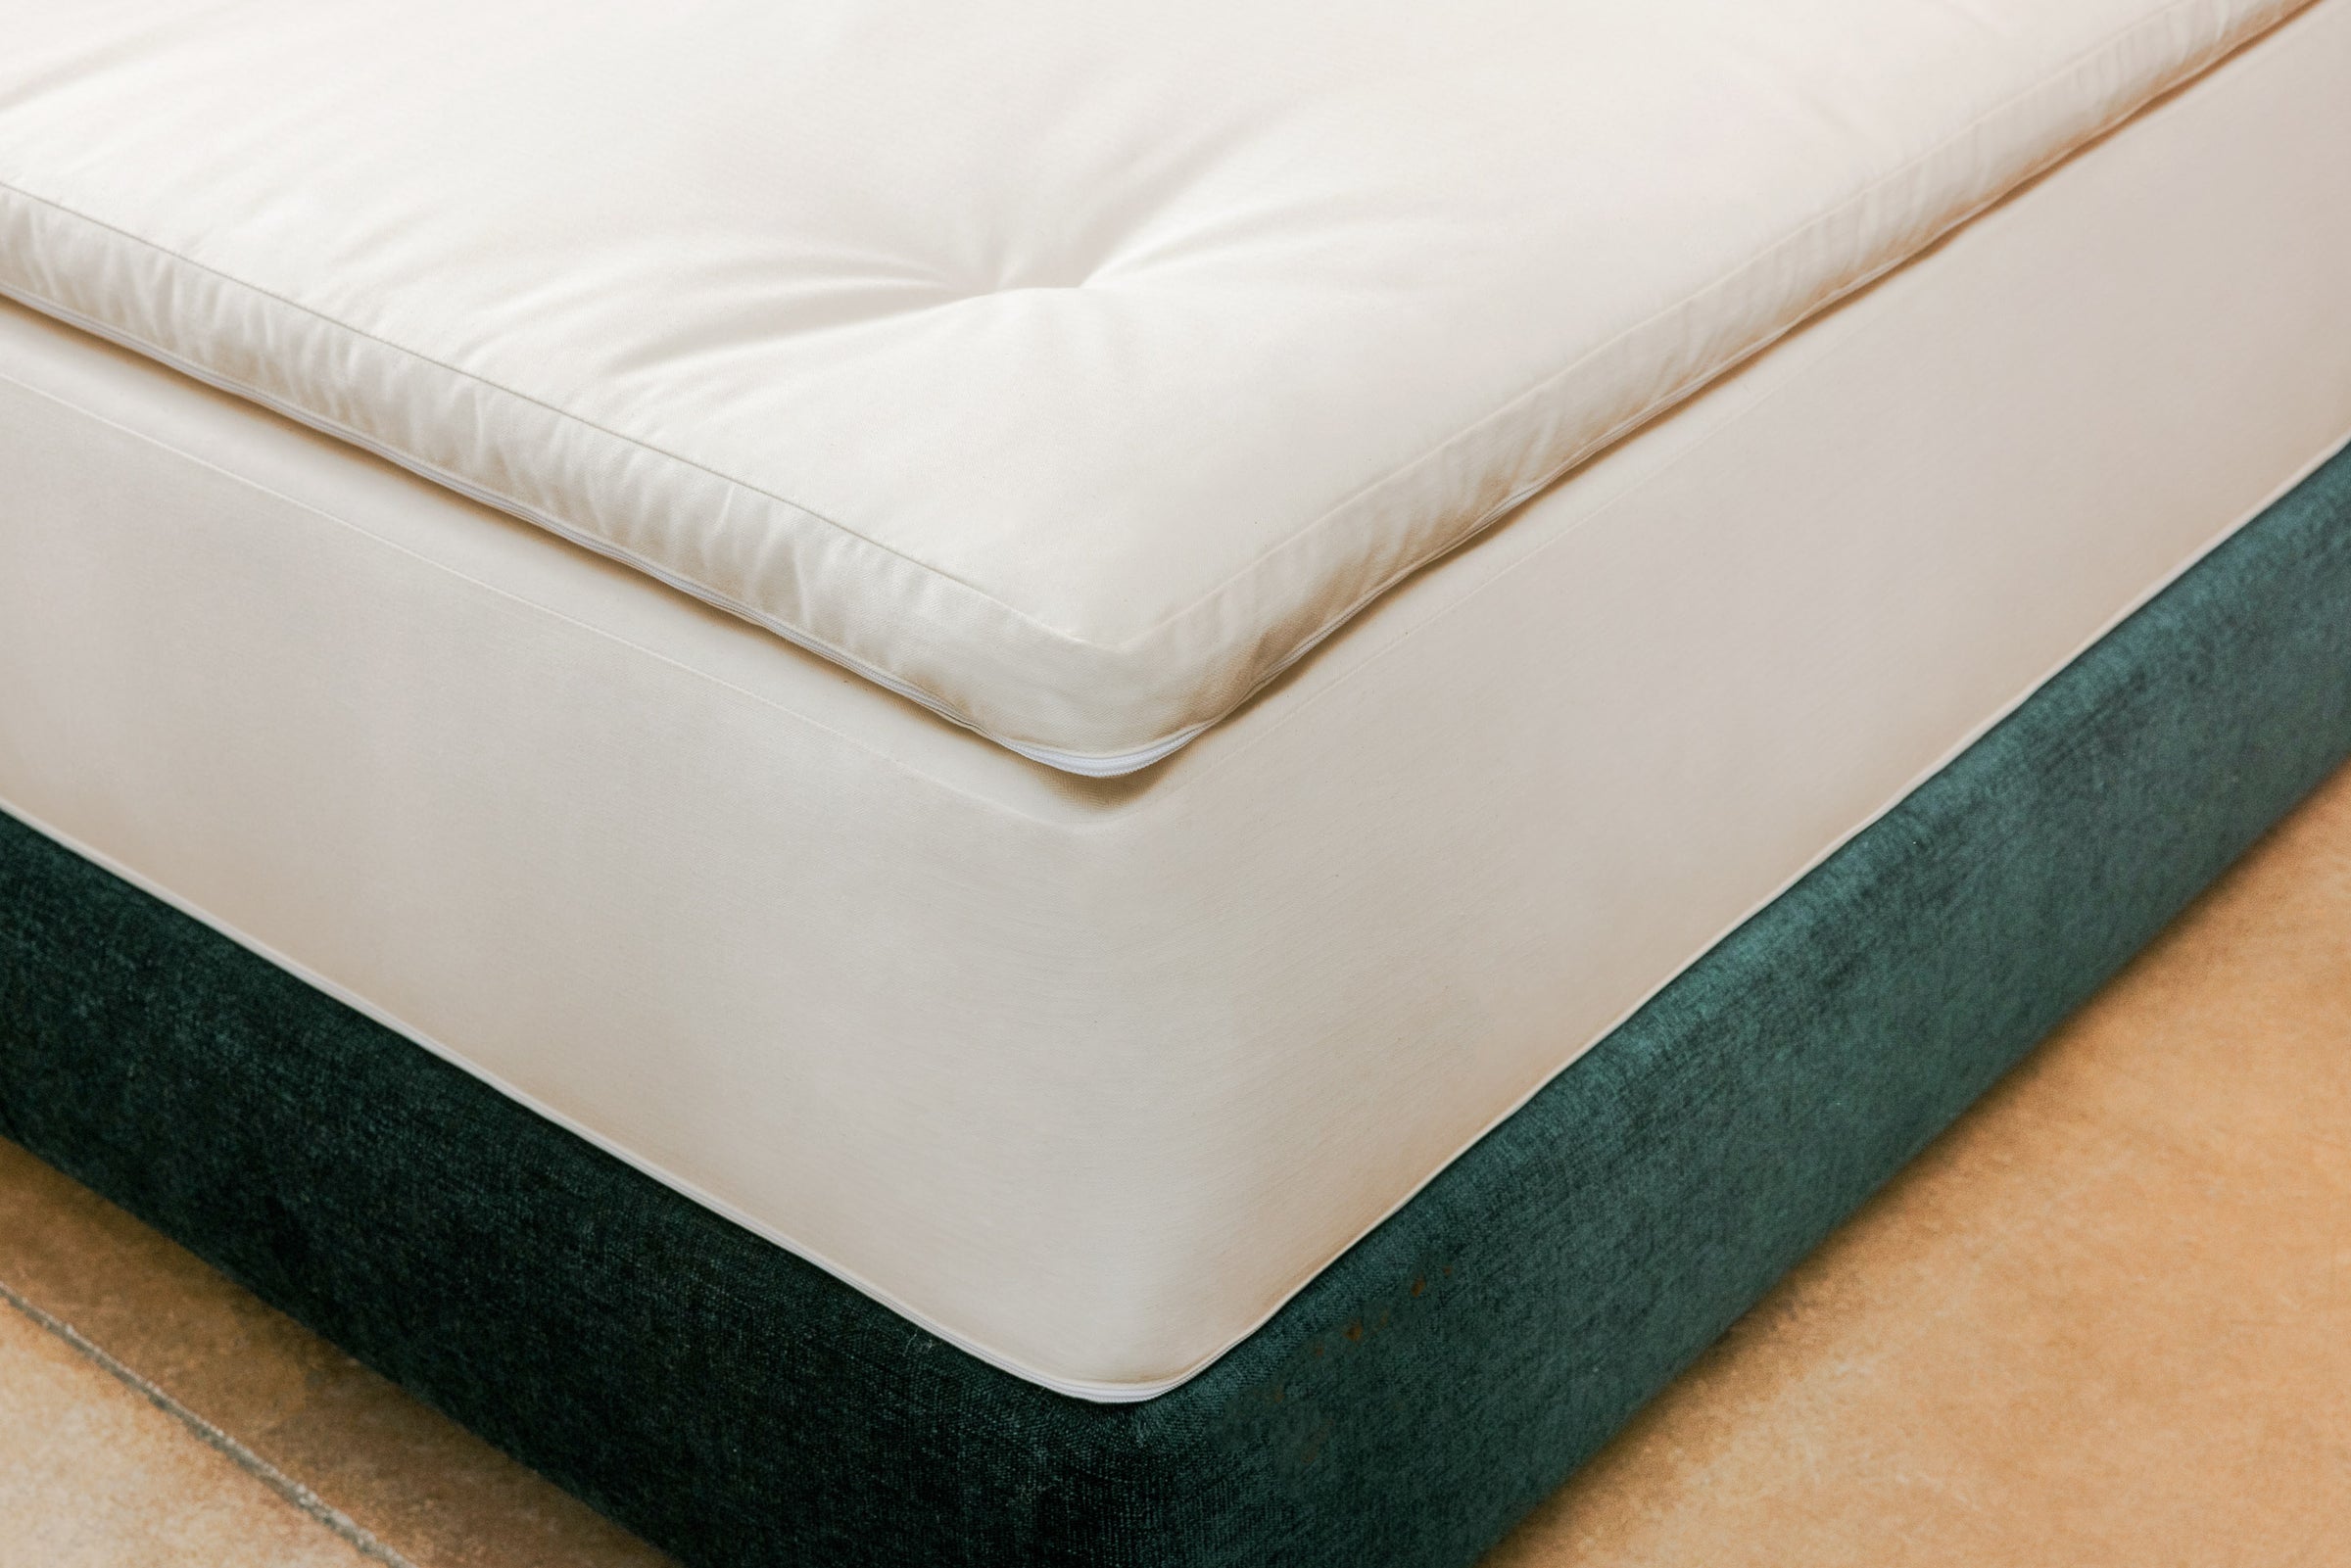 Natural mattress on bed frame with a natural latex and wool topper on top.